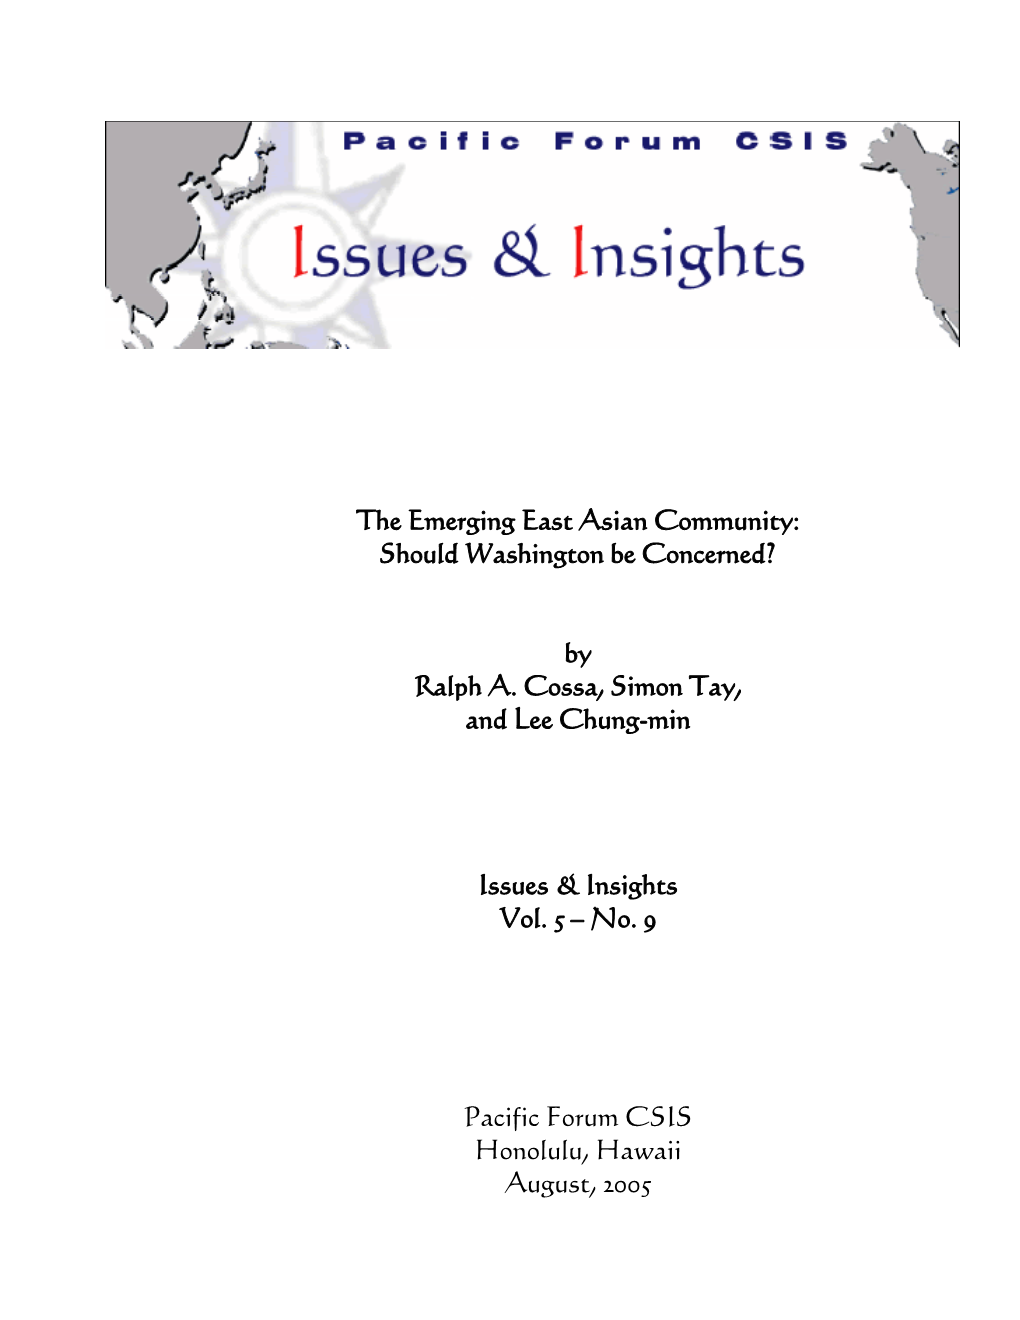 By Ralph A. Cossa, Simon Tay, and Lee Chung-Min Issues